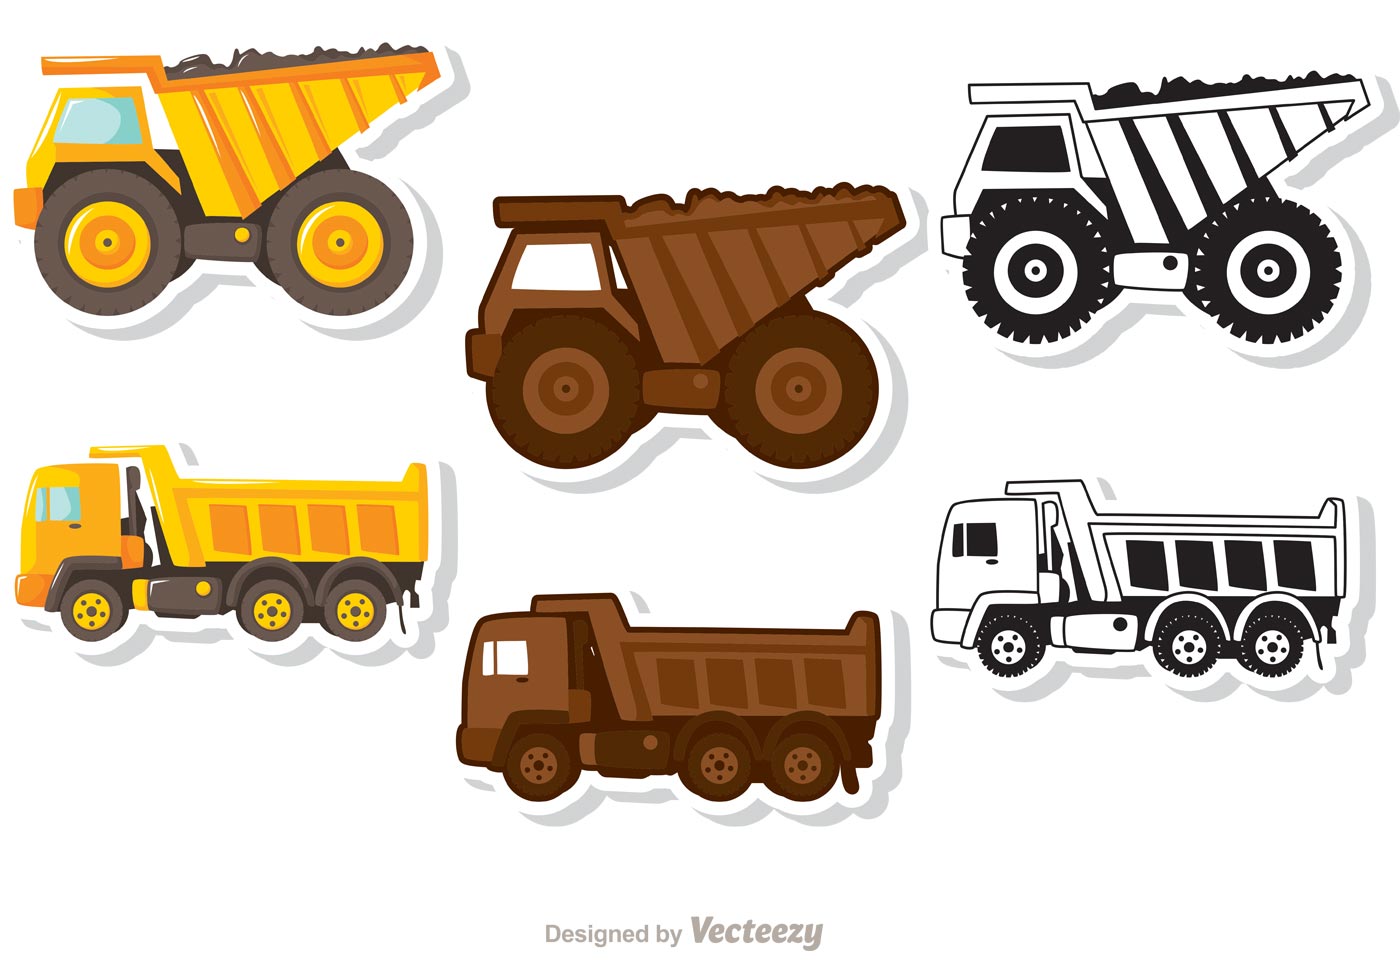 free vector clipart truck - photo #18